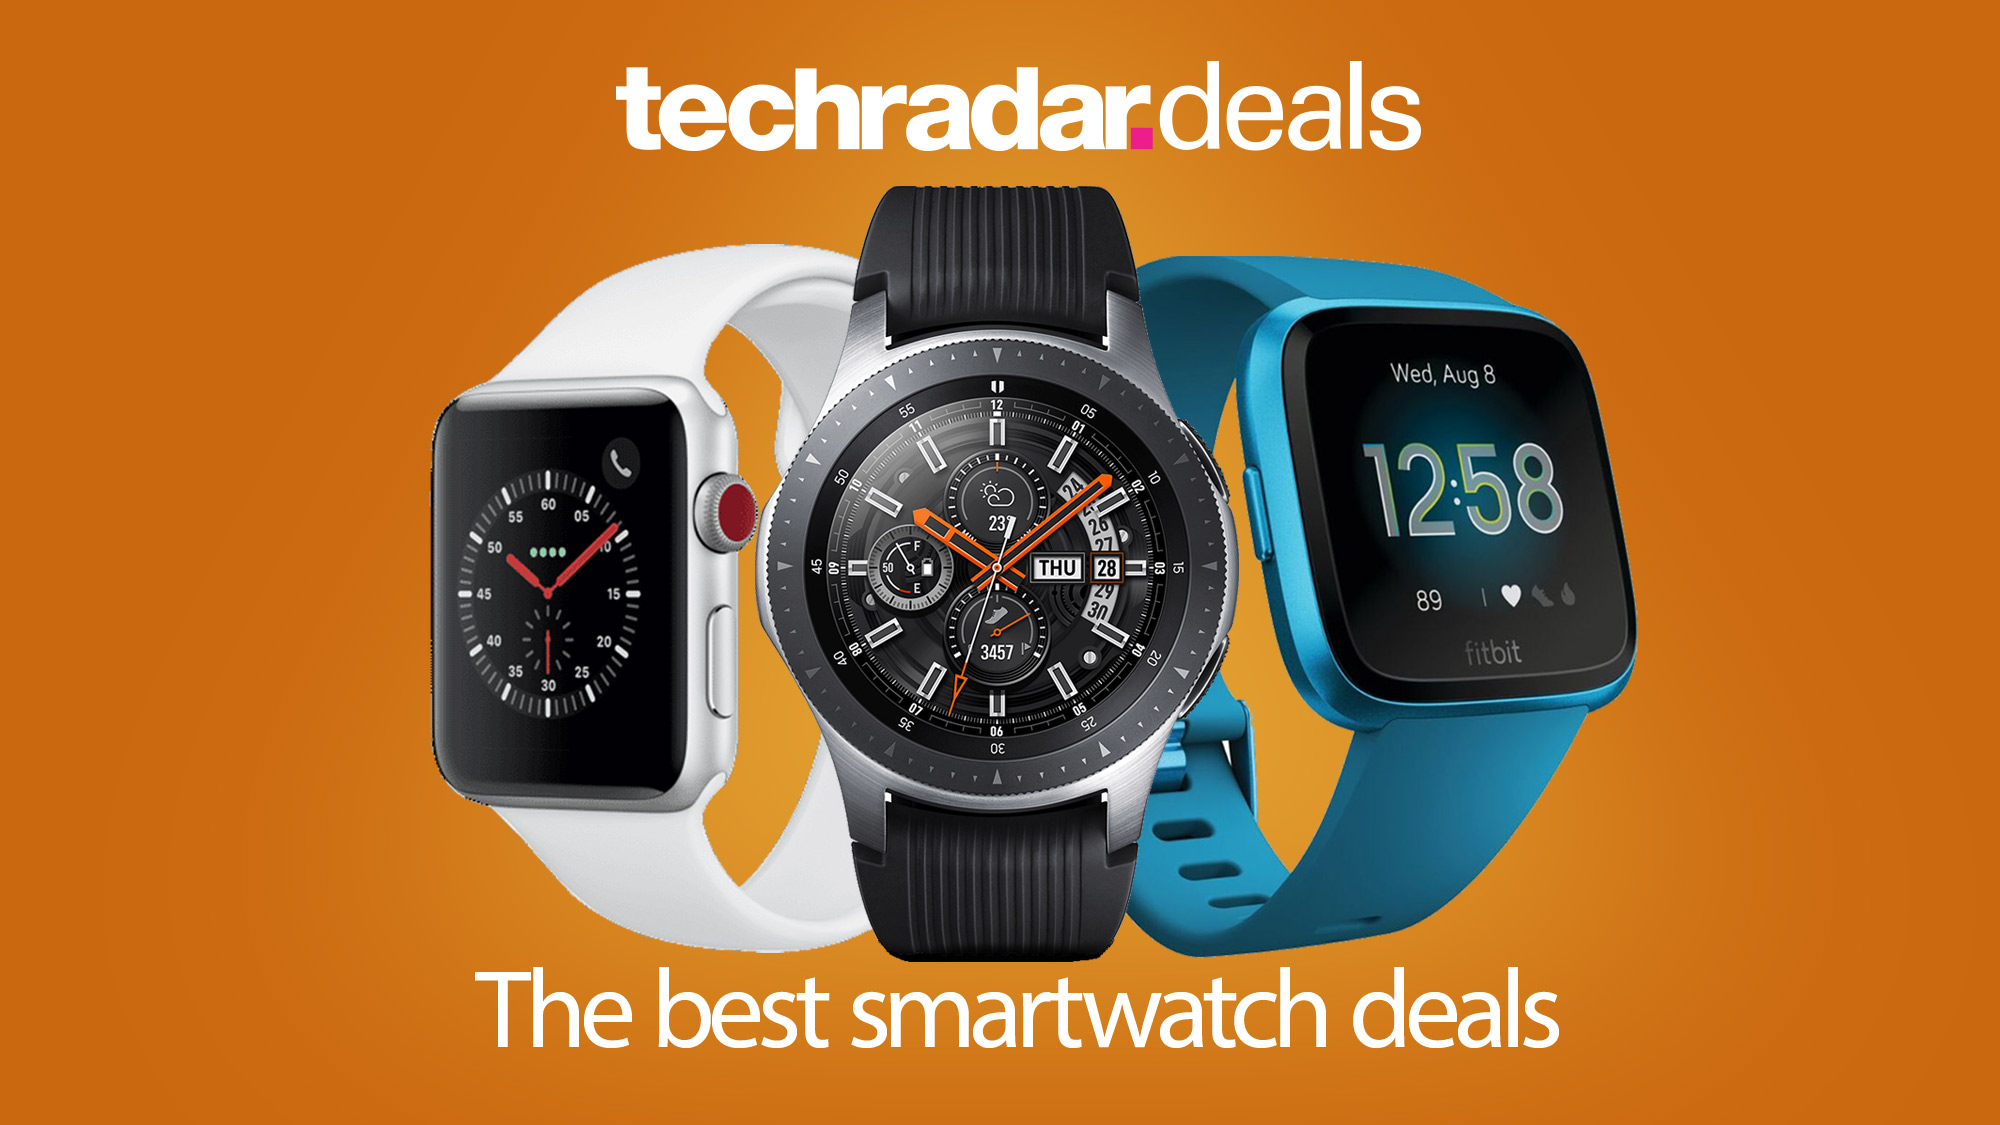 mobile phone and smartwatch deals